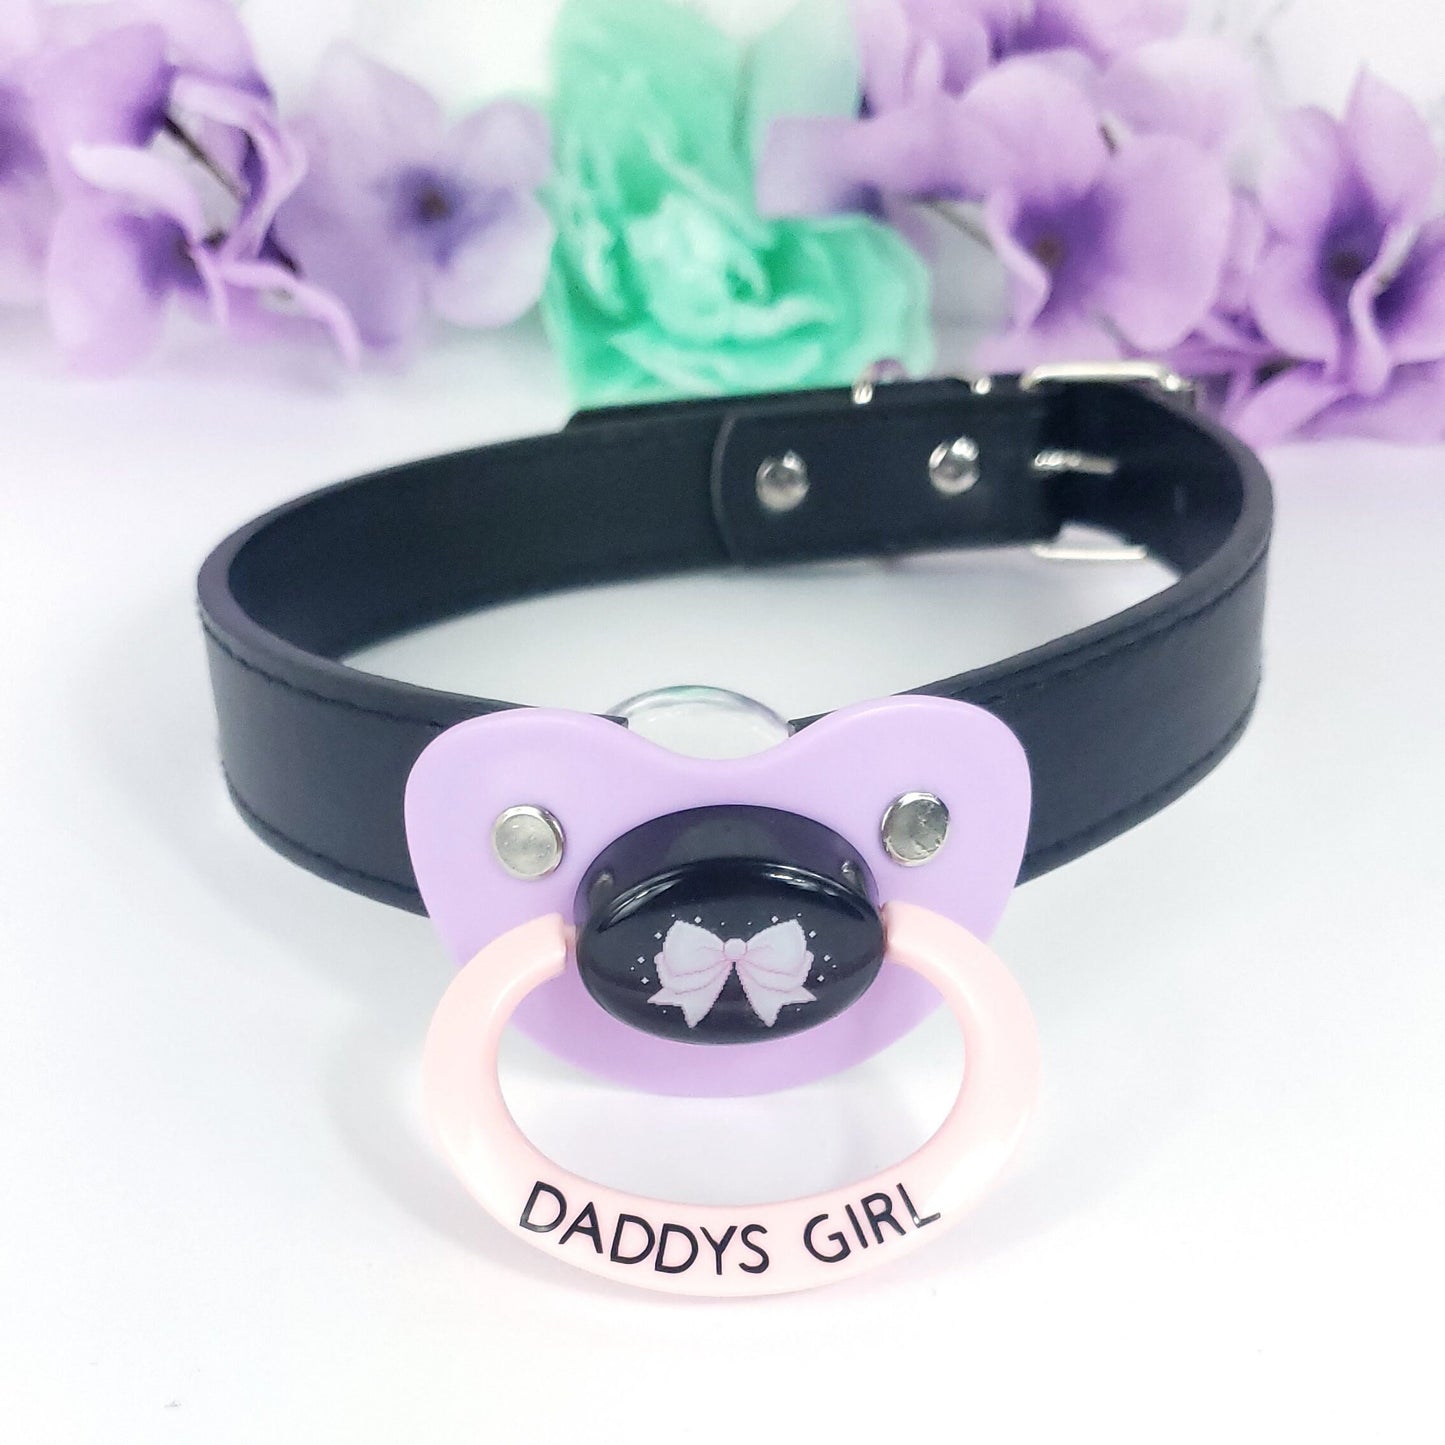 Daddy's Girl Adult Pacifier Gag